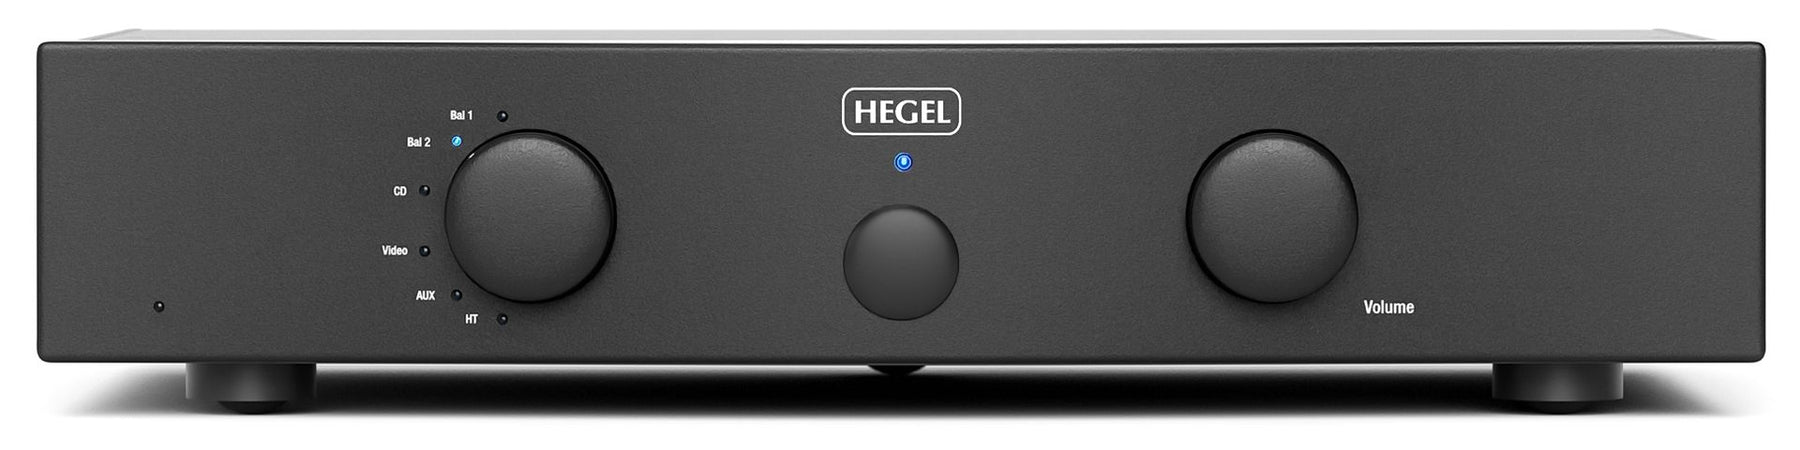 Hegel P20 - Preamplificatore stereo